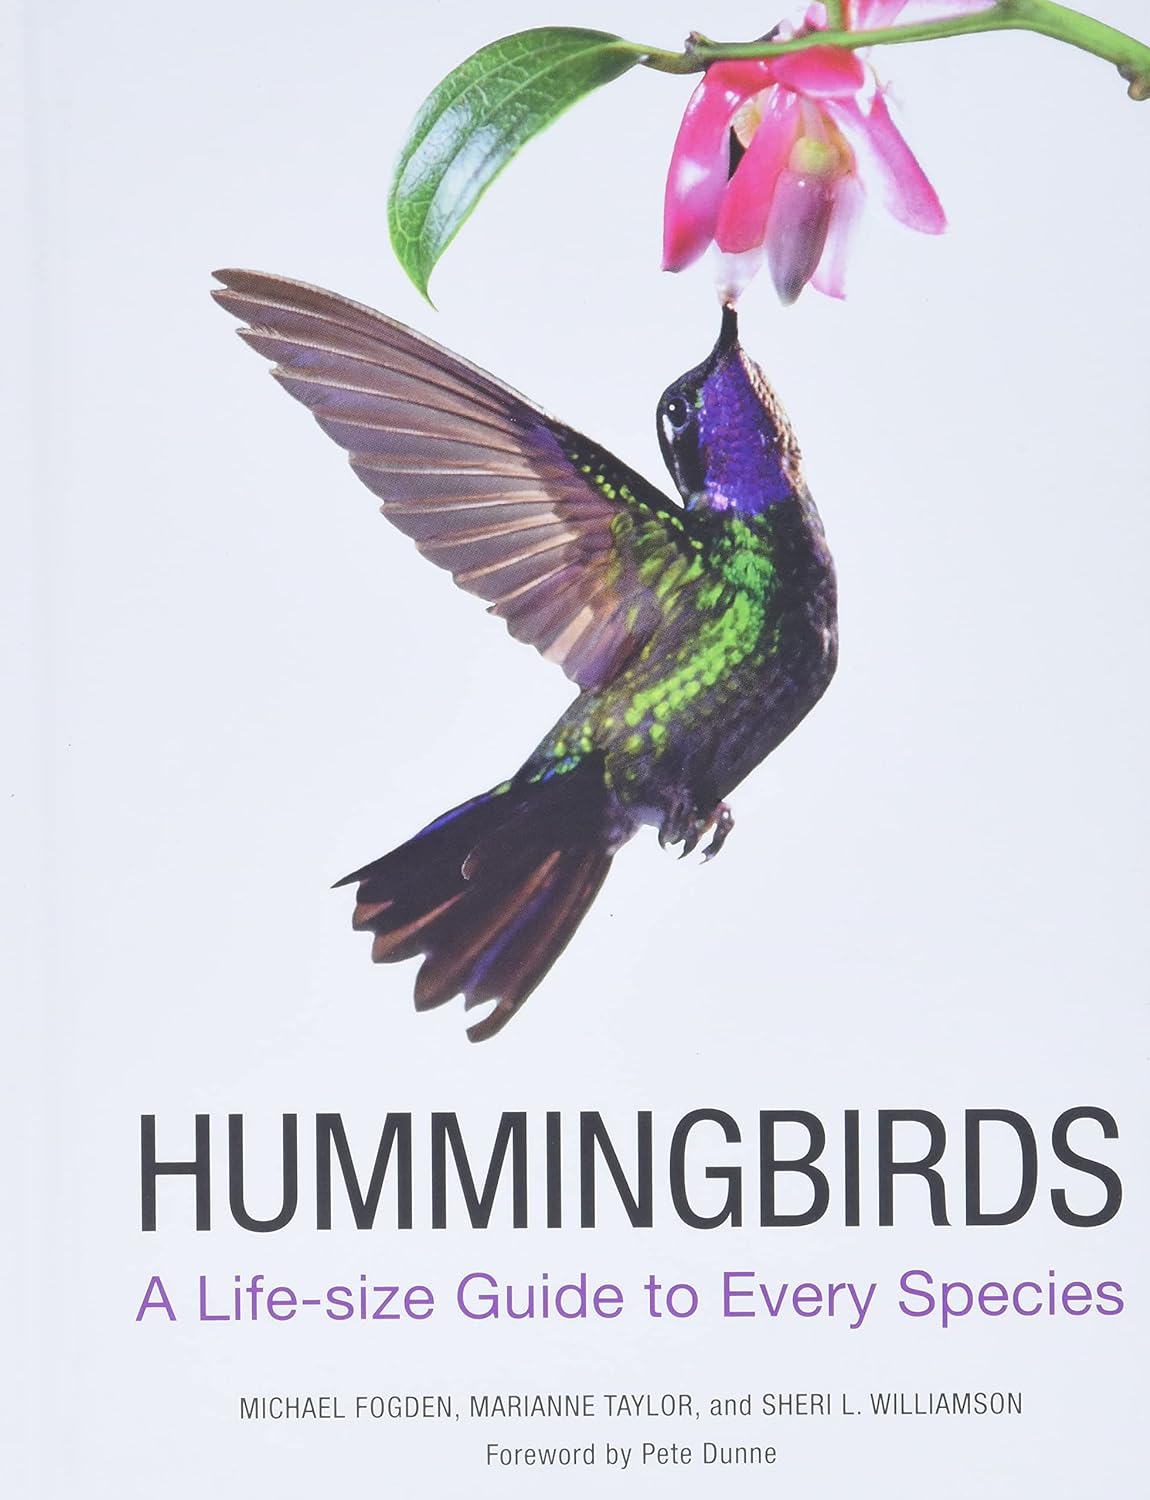 books about hummingbirds10